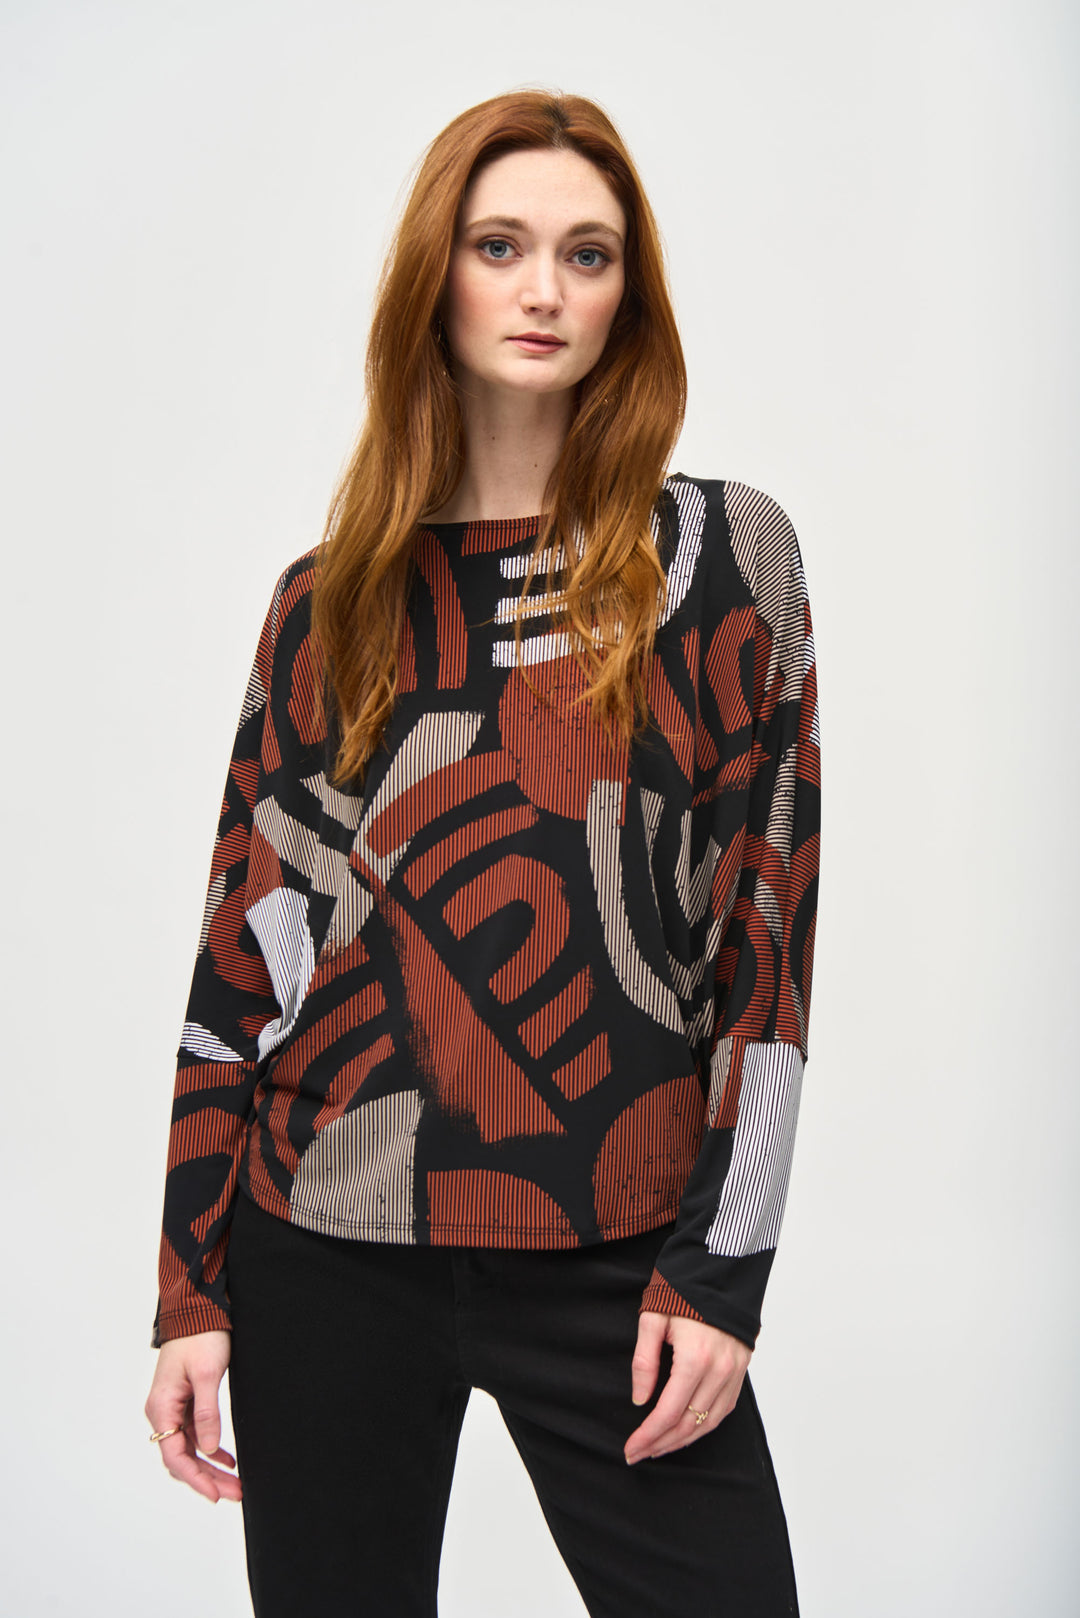 Joseph Ribkoff Fall 2024 Featuring a boat neck style and full length dolman sleeves, this top is made with silky like fabric for an irresistibly comfortable feel!